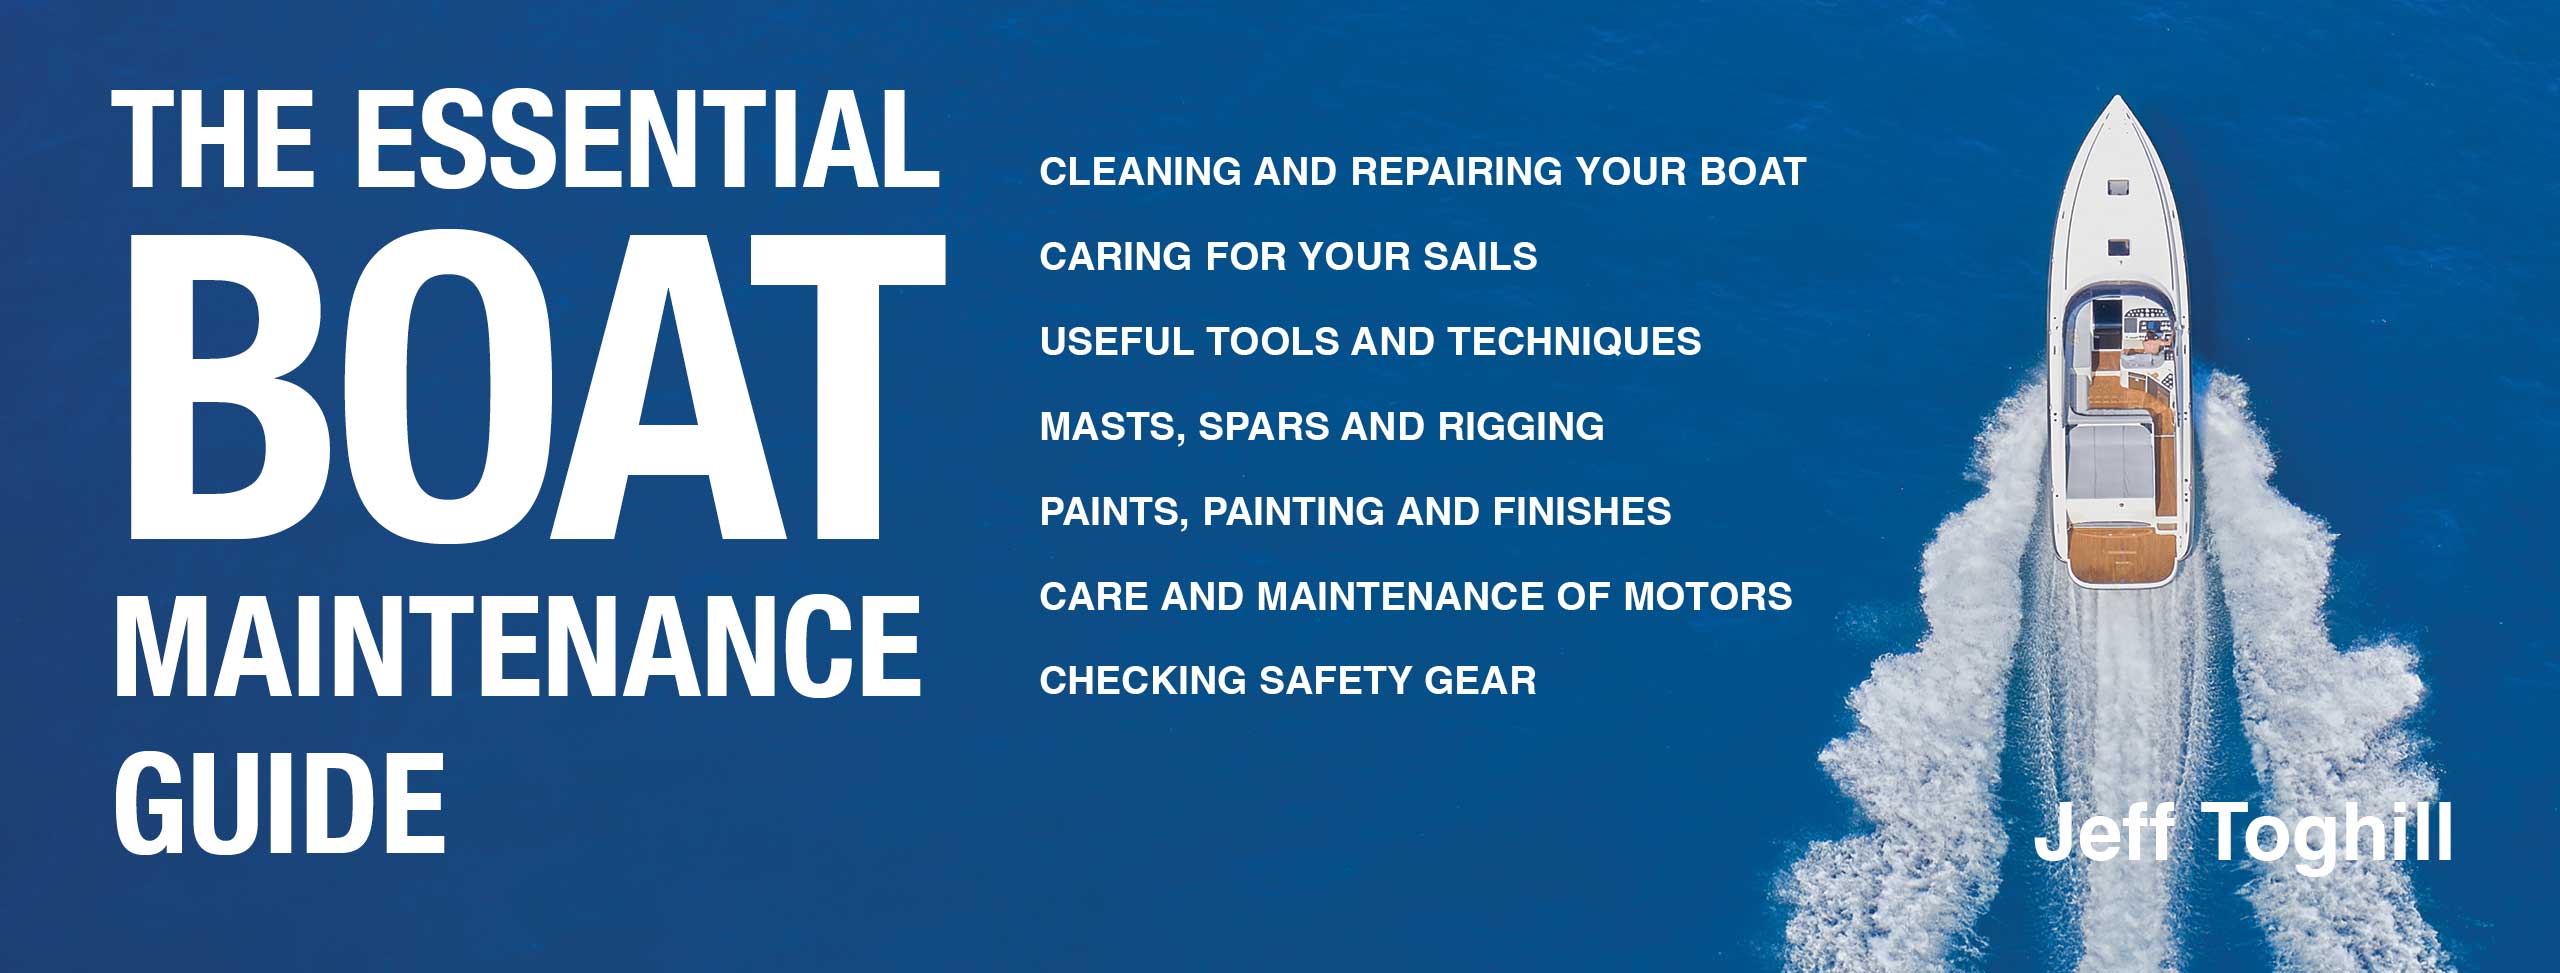 Essential Boat Maintenance Guide